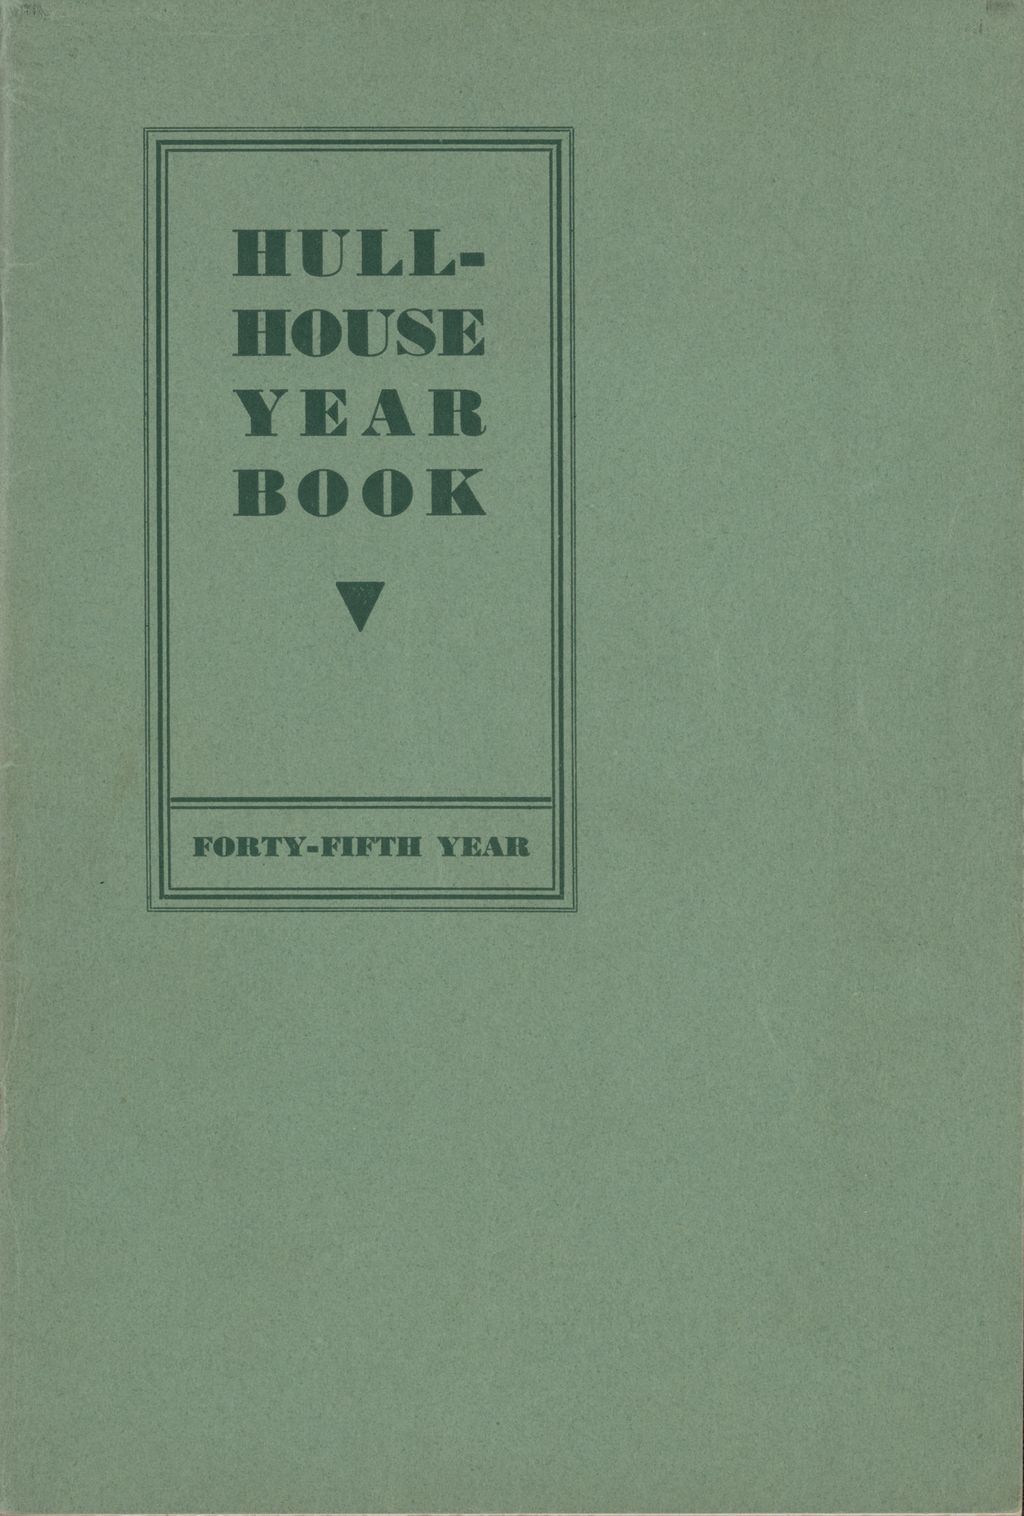 Miniature of Hull-House Year Book, 1932-1933